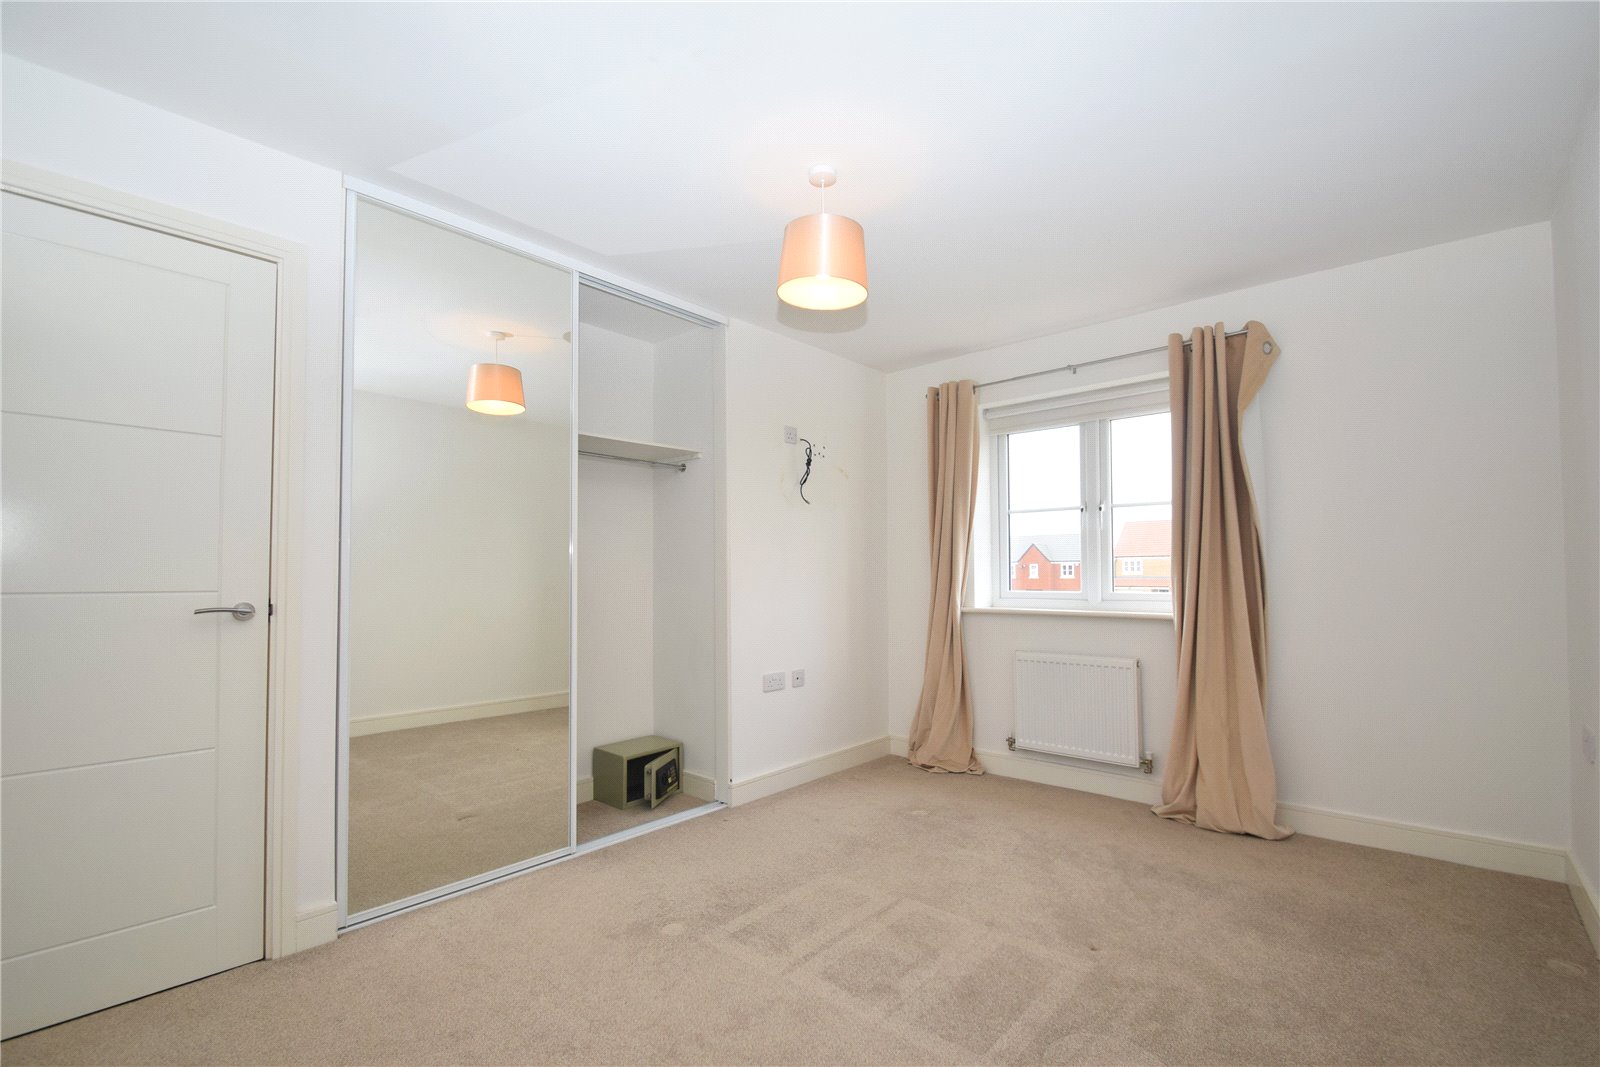 4 bed house for sale in Badger Lane, Middle Deepdale  - Property Image 10